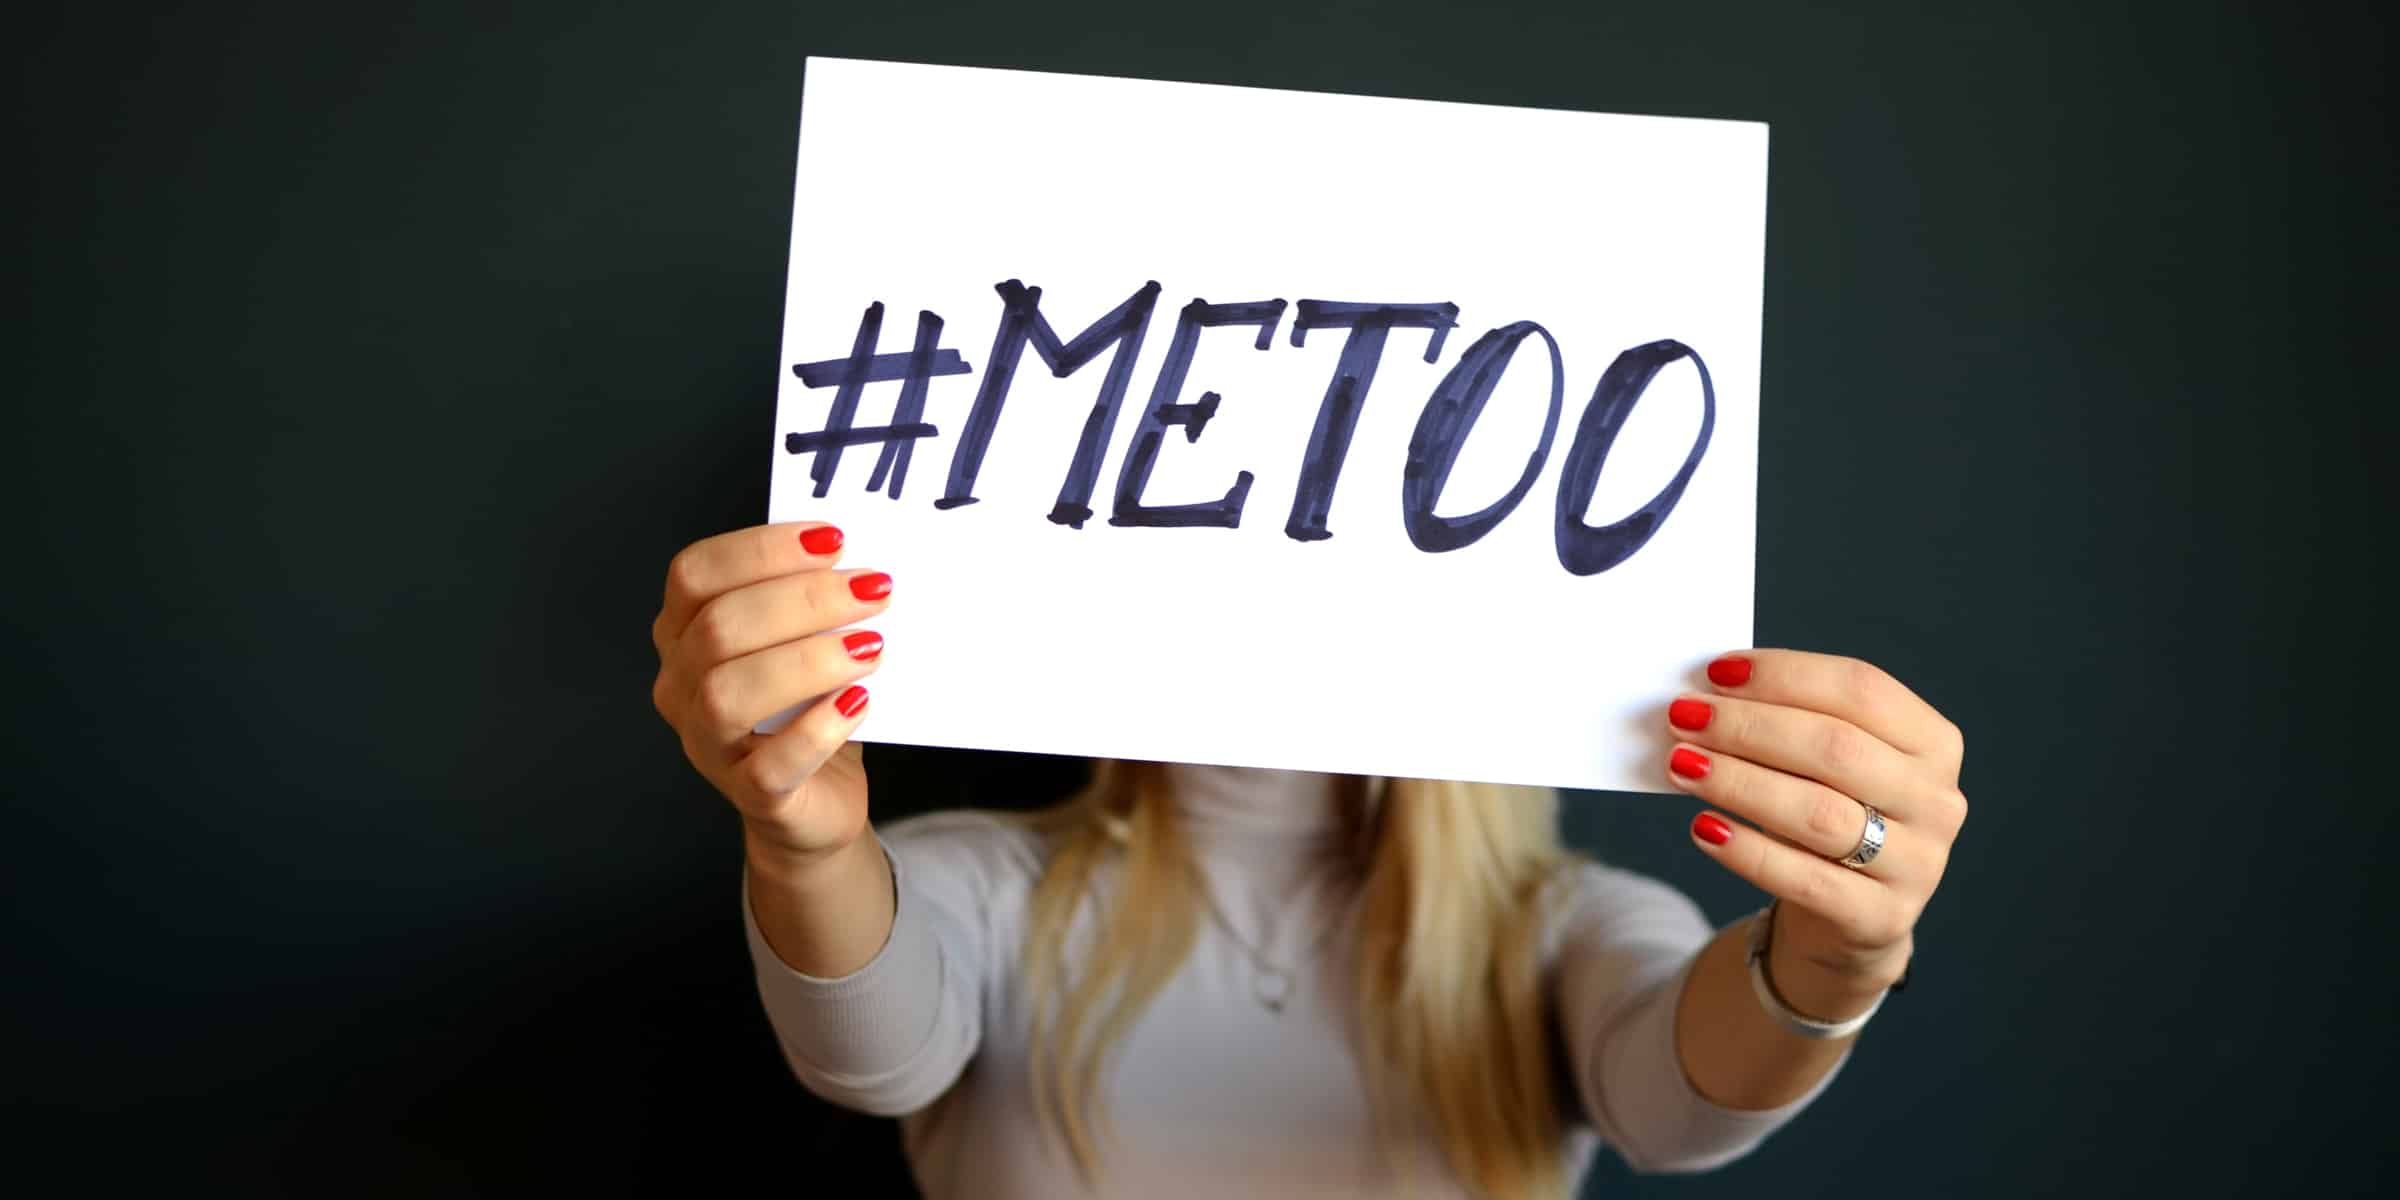 #MeToo: How to protect yourself from sexual harassment, assault and abuse